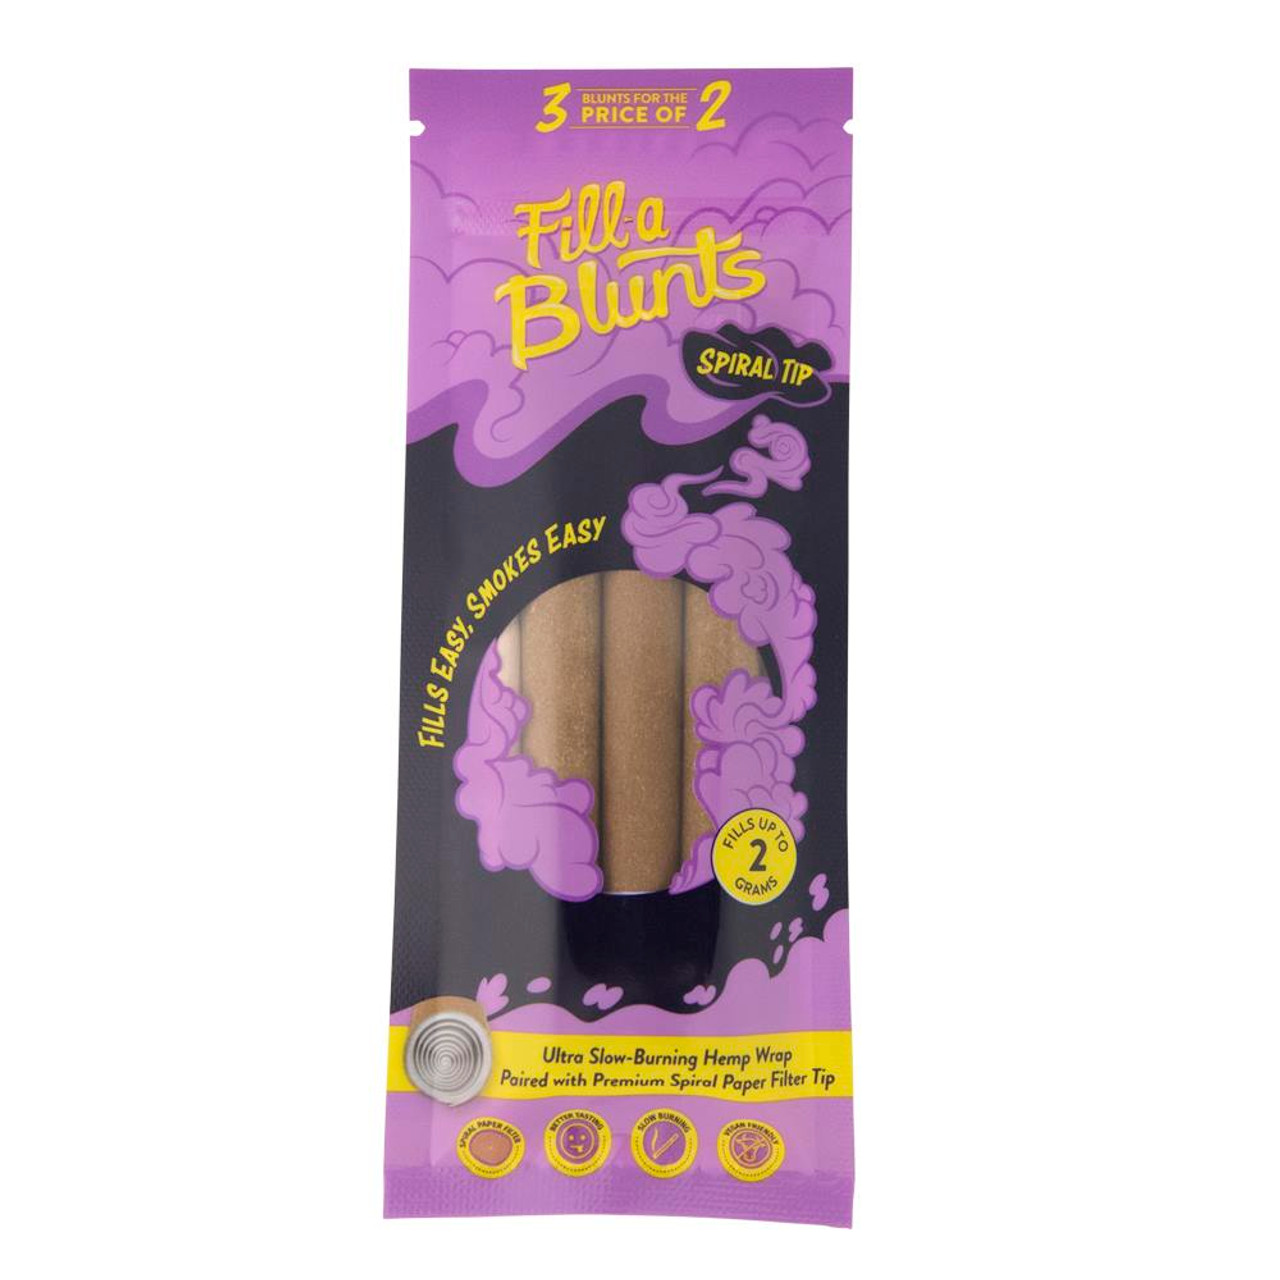 Blunt Tubes with Spiral Paper Tips